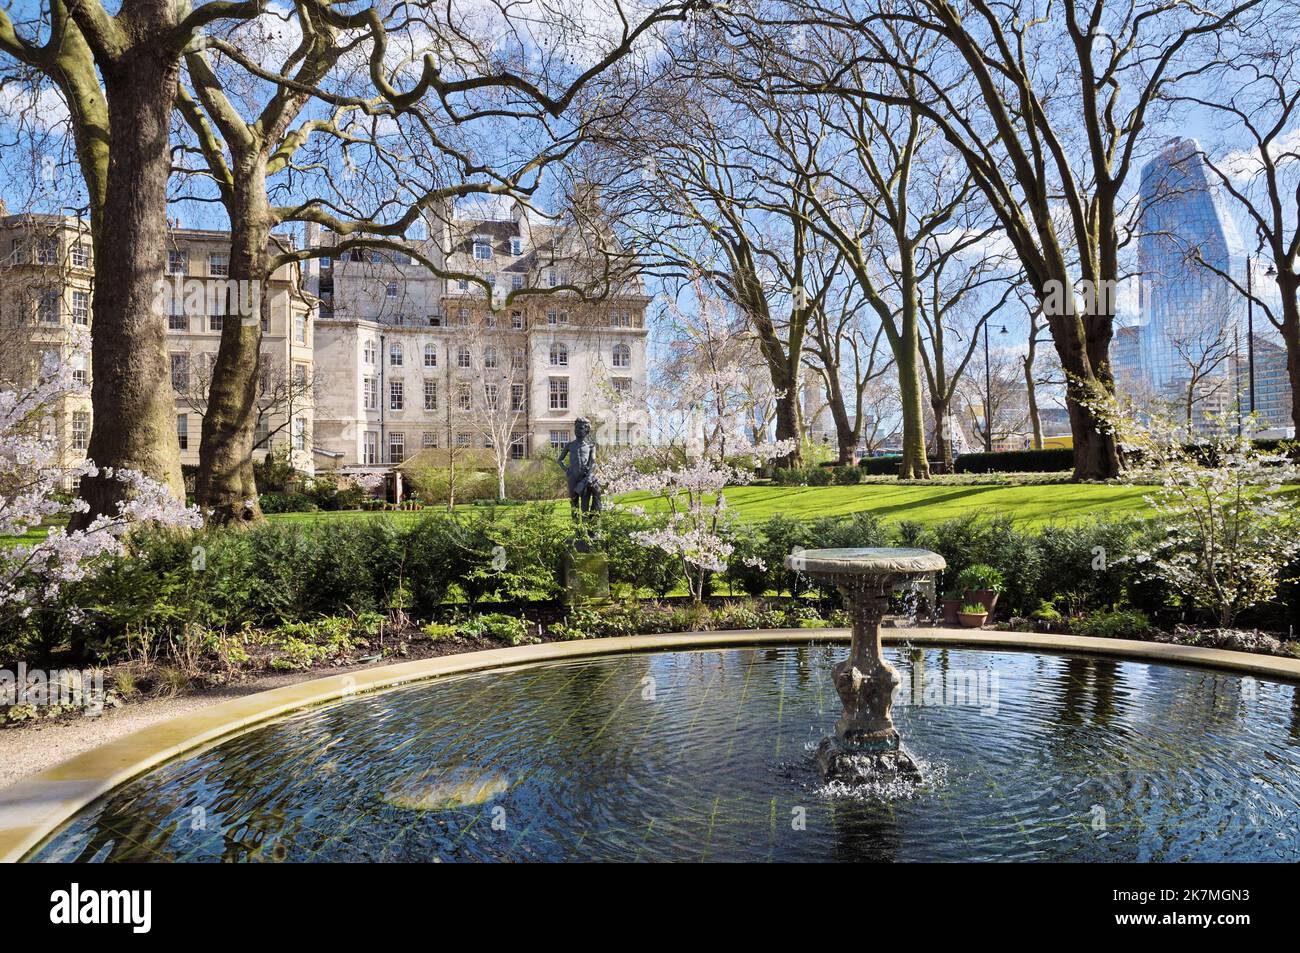 The Pond Garden with water feature and statue in grounds of The Inner Temple Garden in early spring, Victoria Embankment, City of London, England, UK Stock Photo